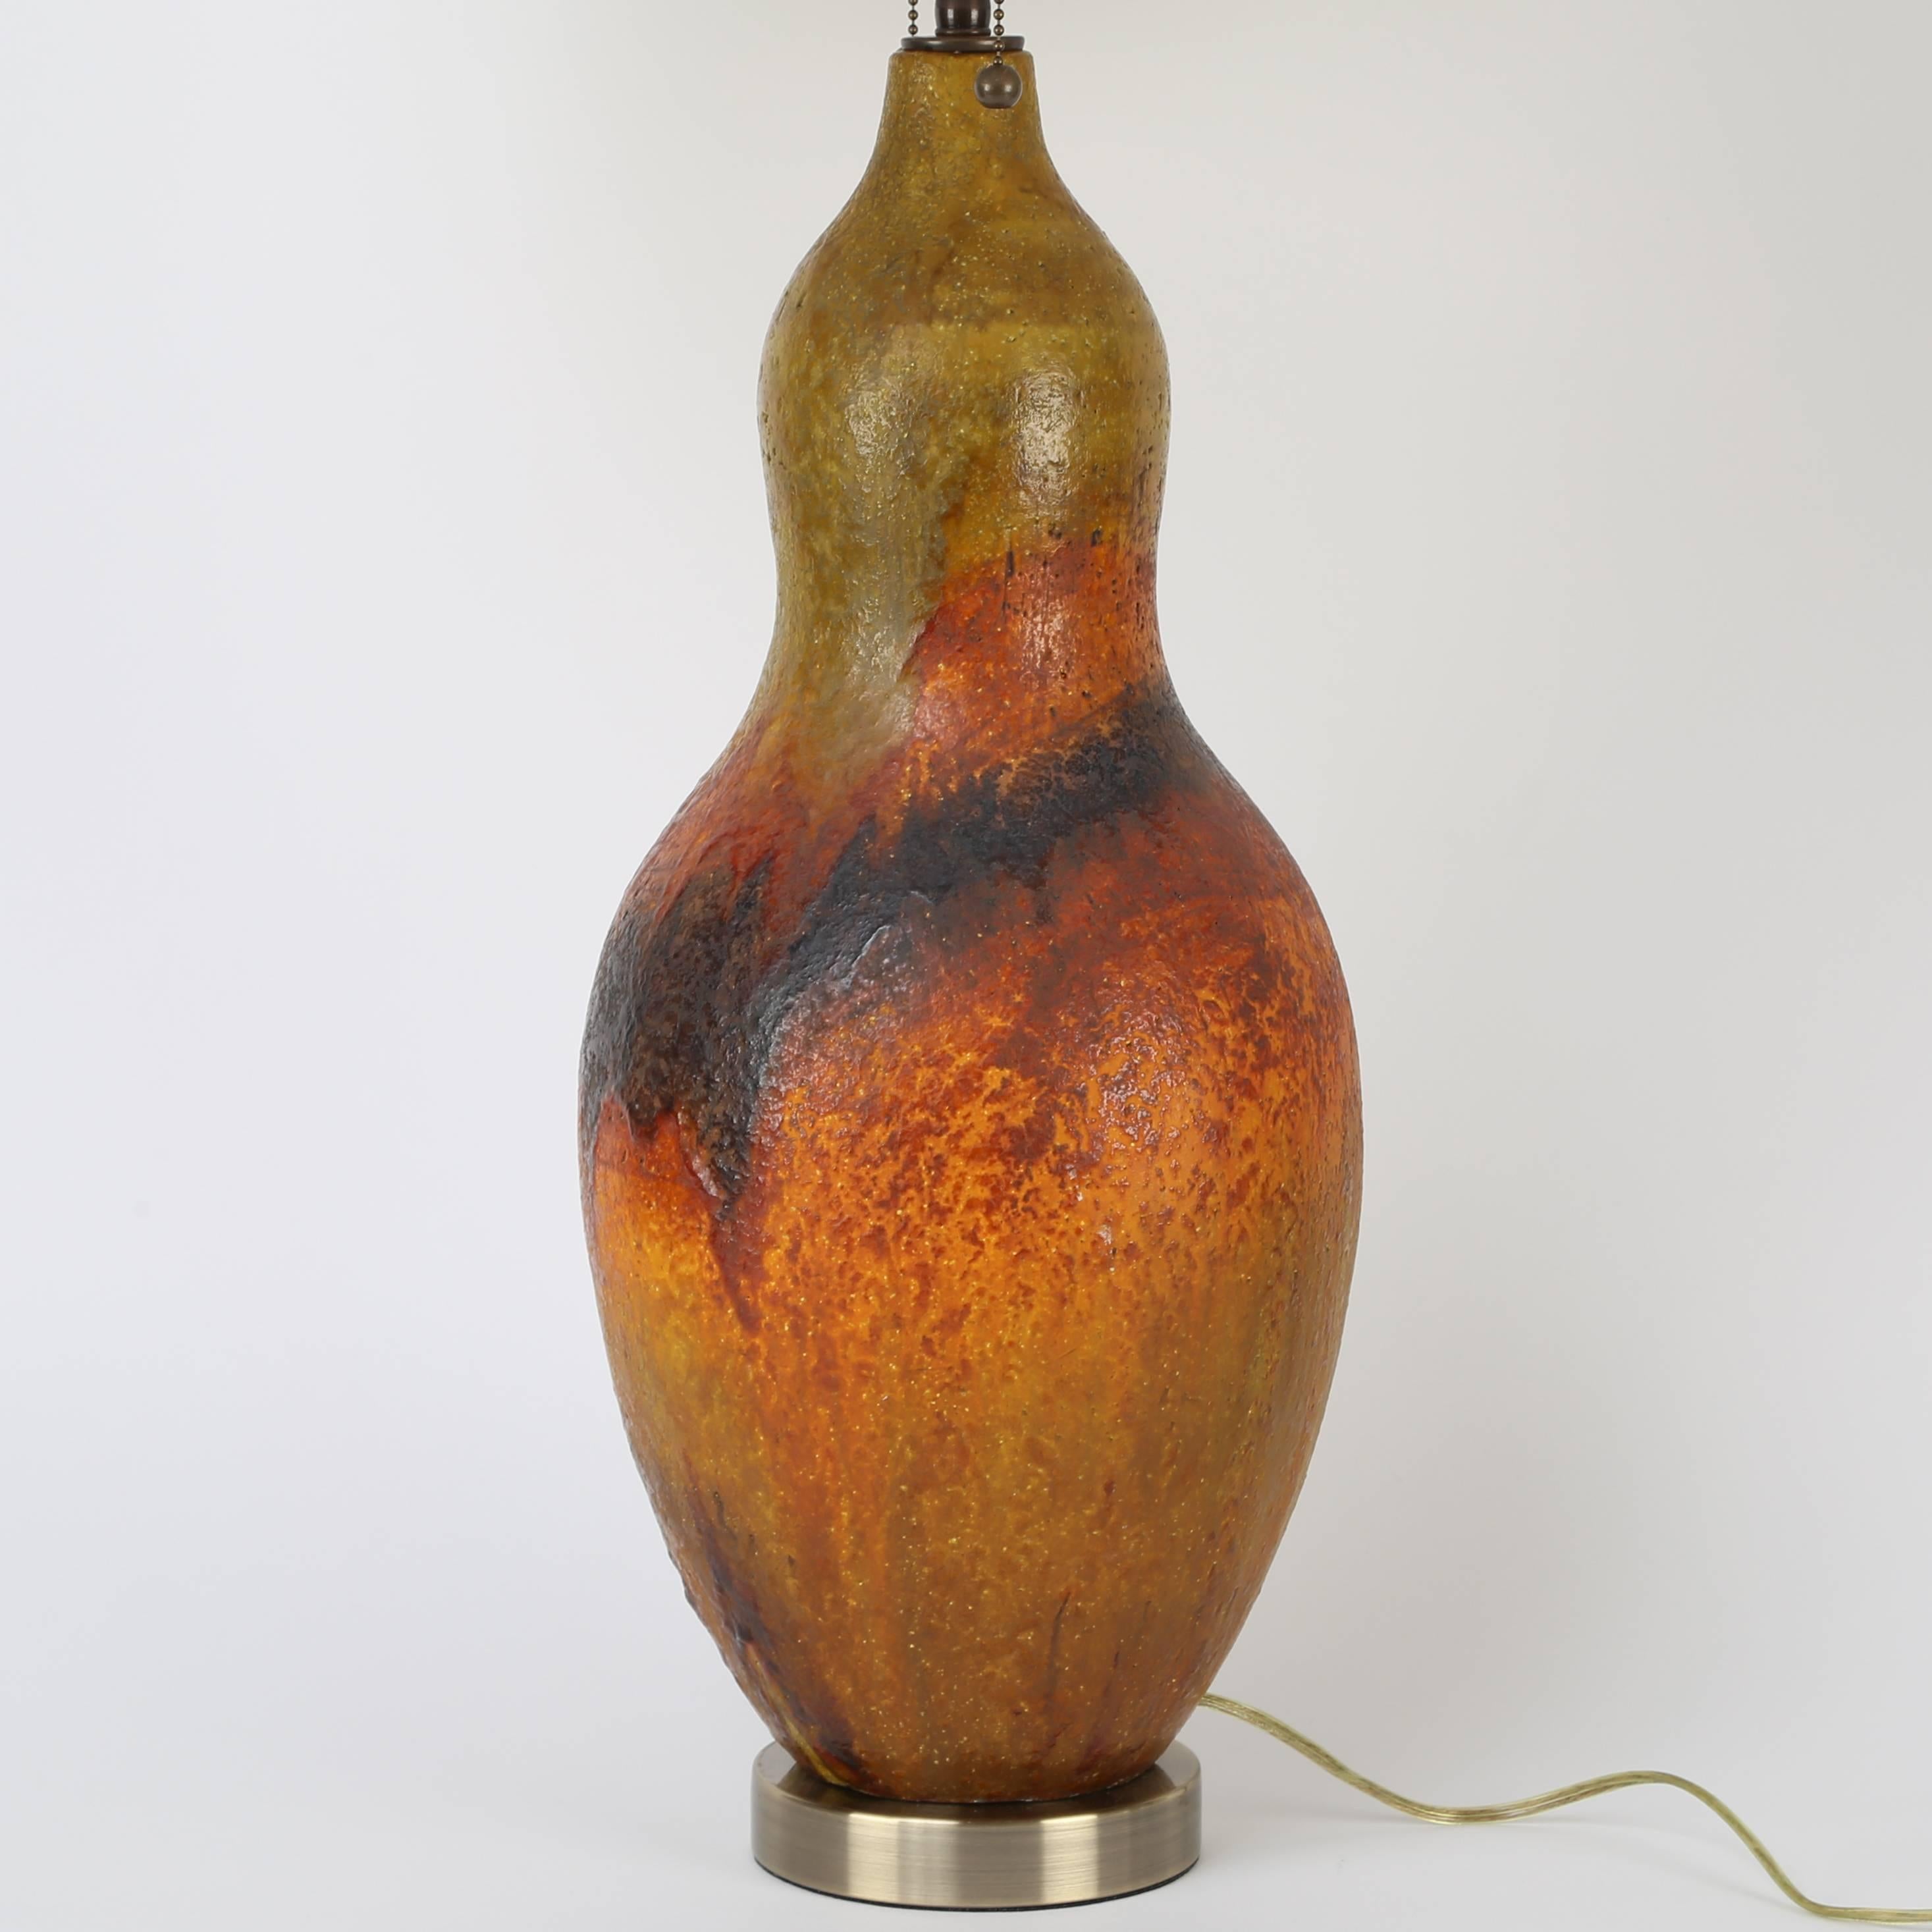 Substantial Fantoni for Raymor ceramic table lamp glazed in rich hues of green, orange, red and brown. The bulbous body is 9